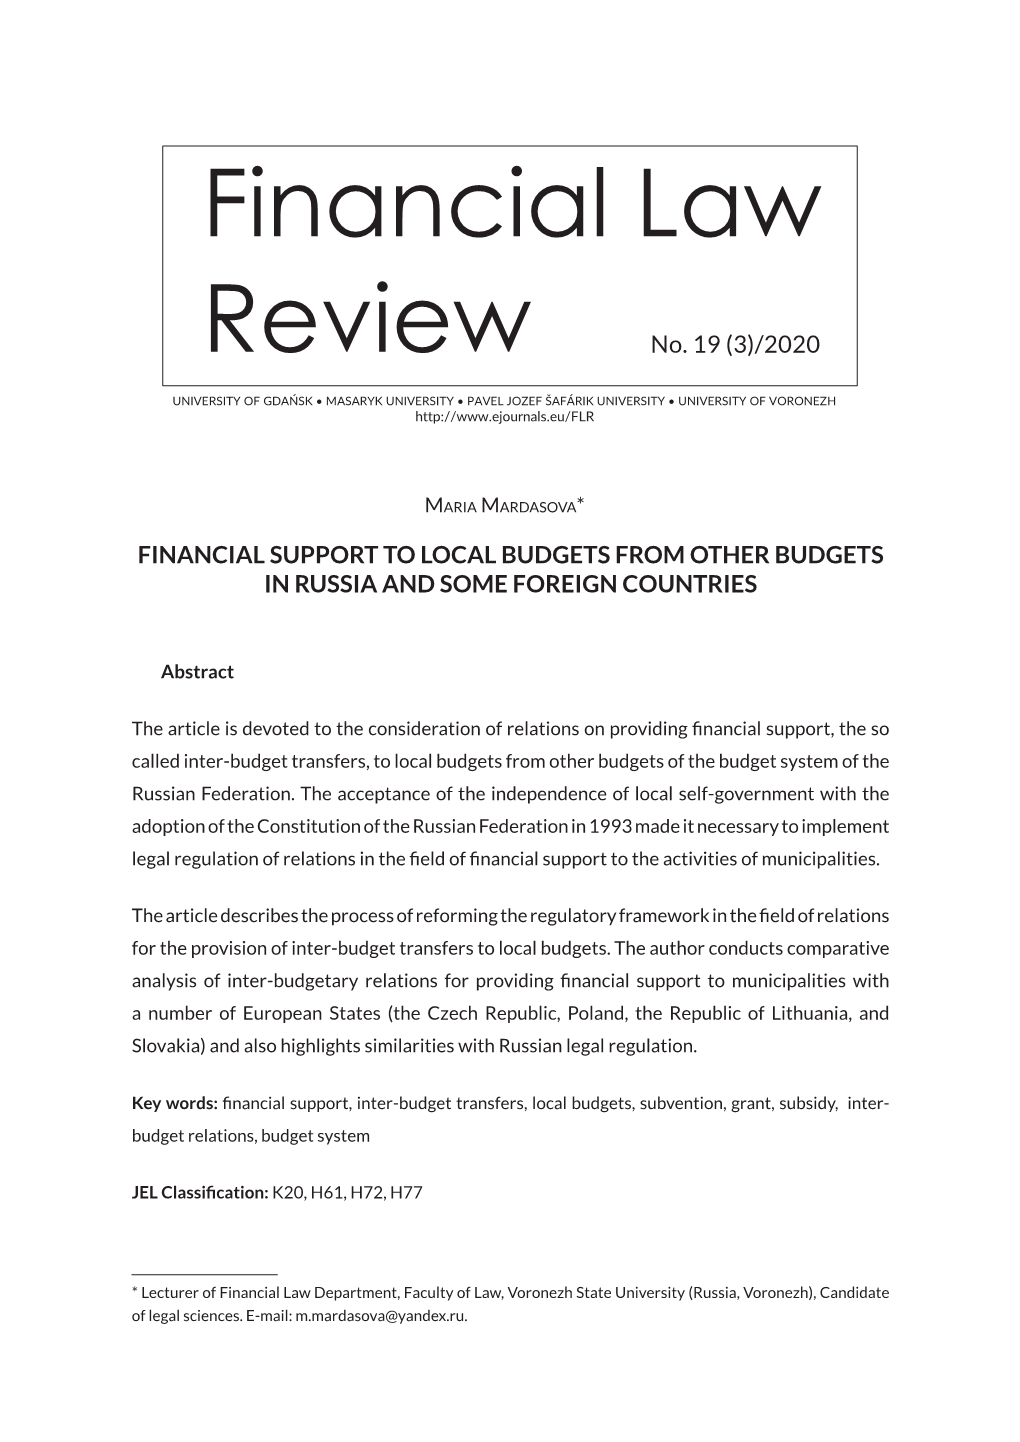 Financial Law Review No. 19 (3)/2020